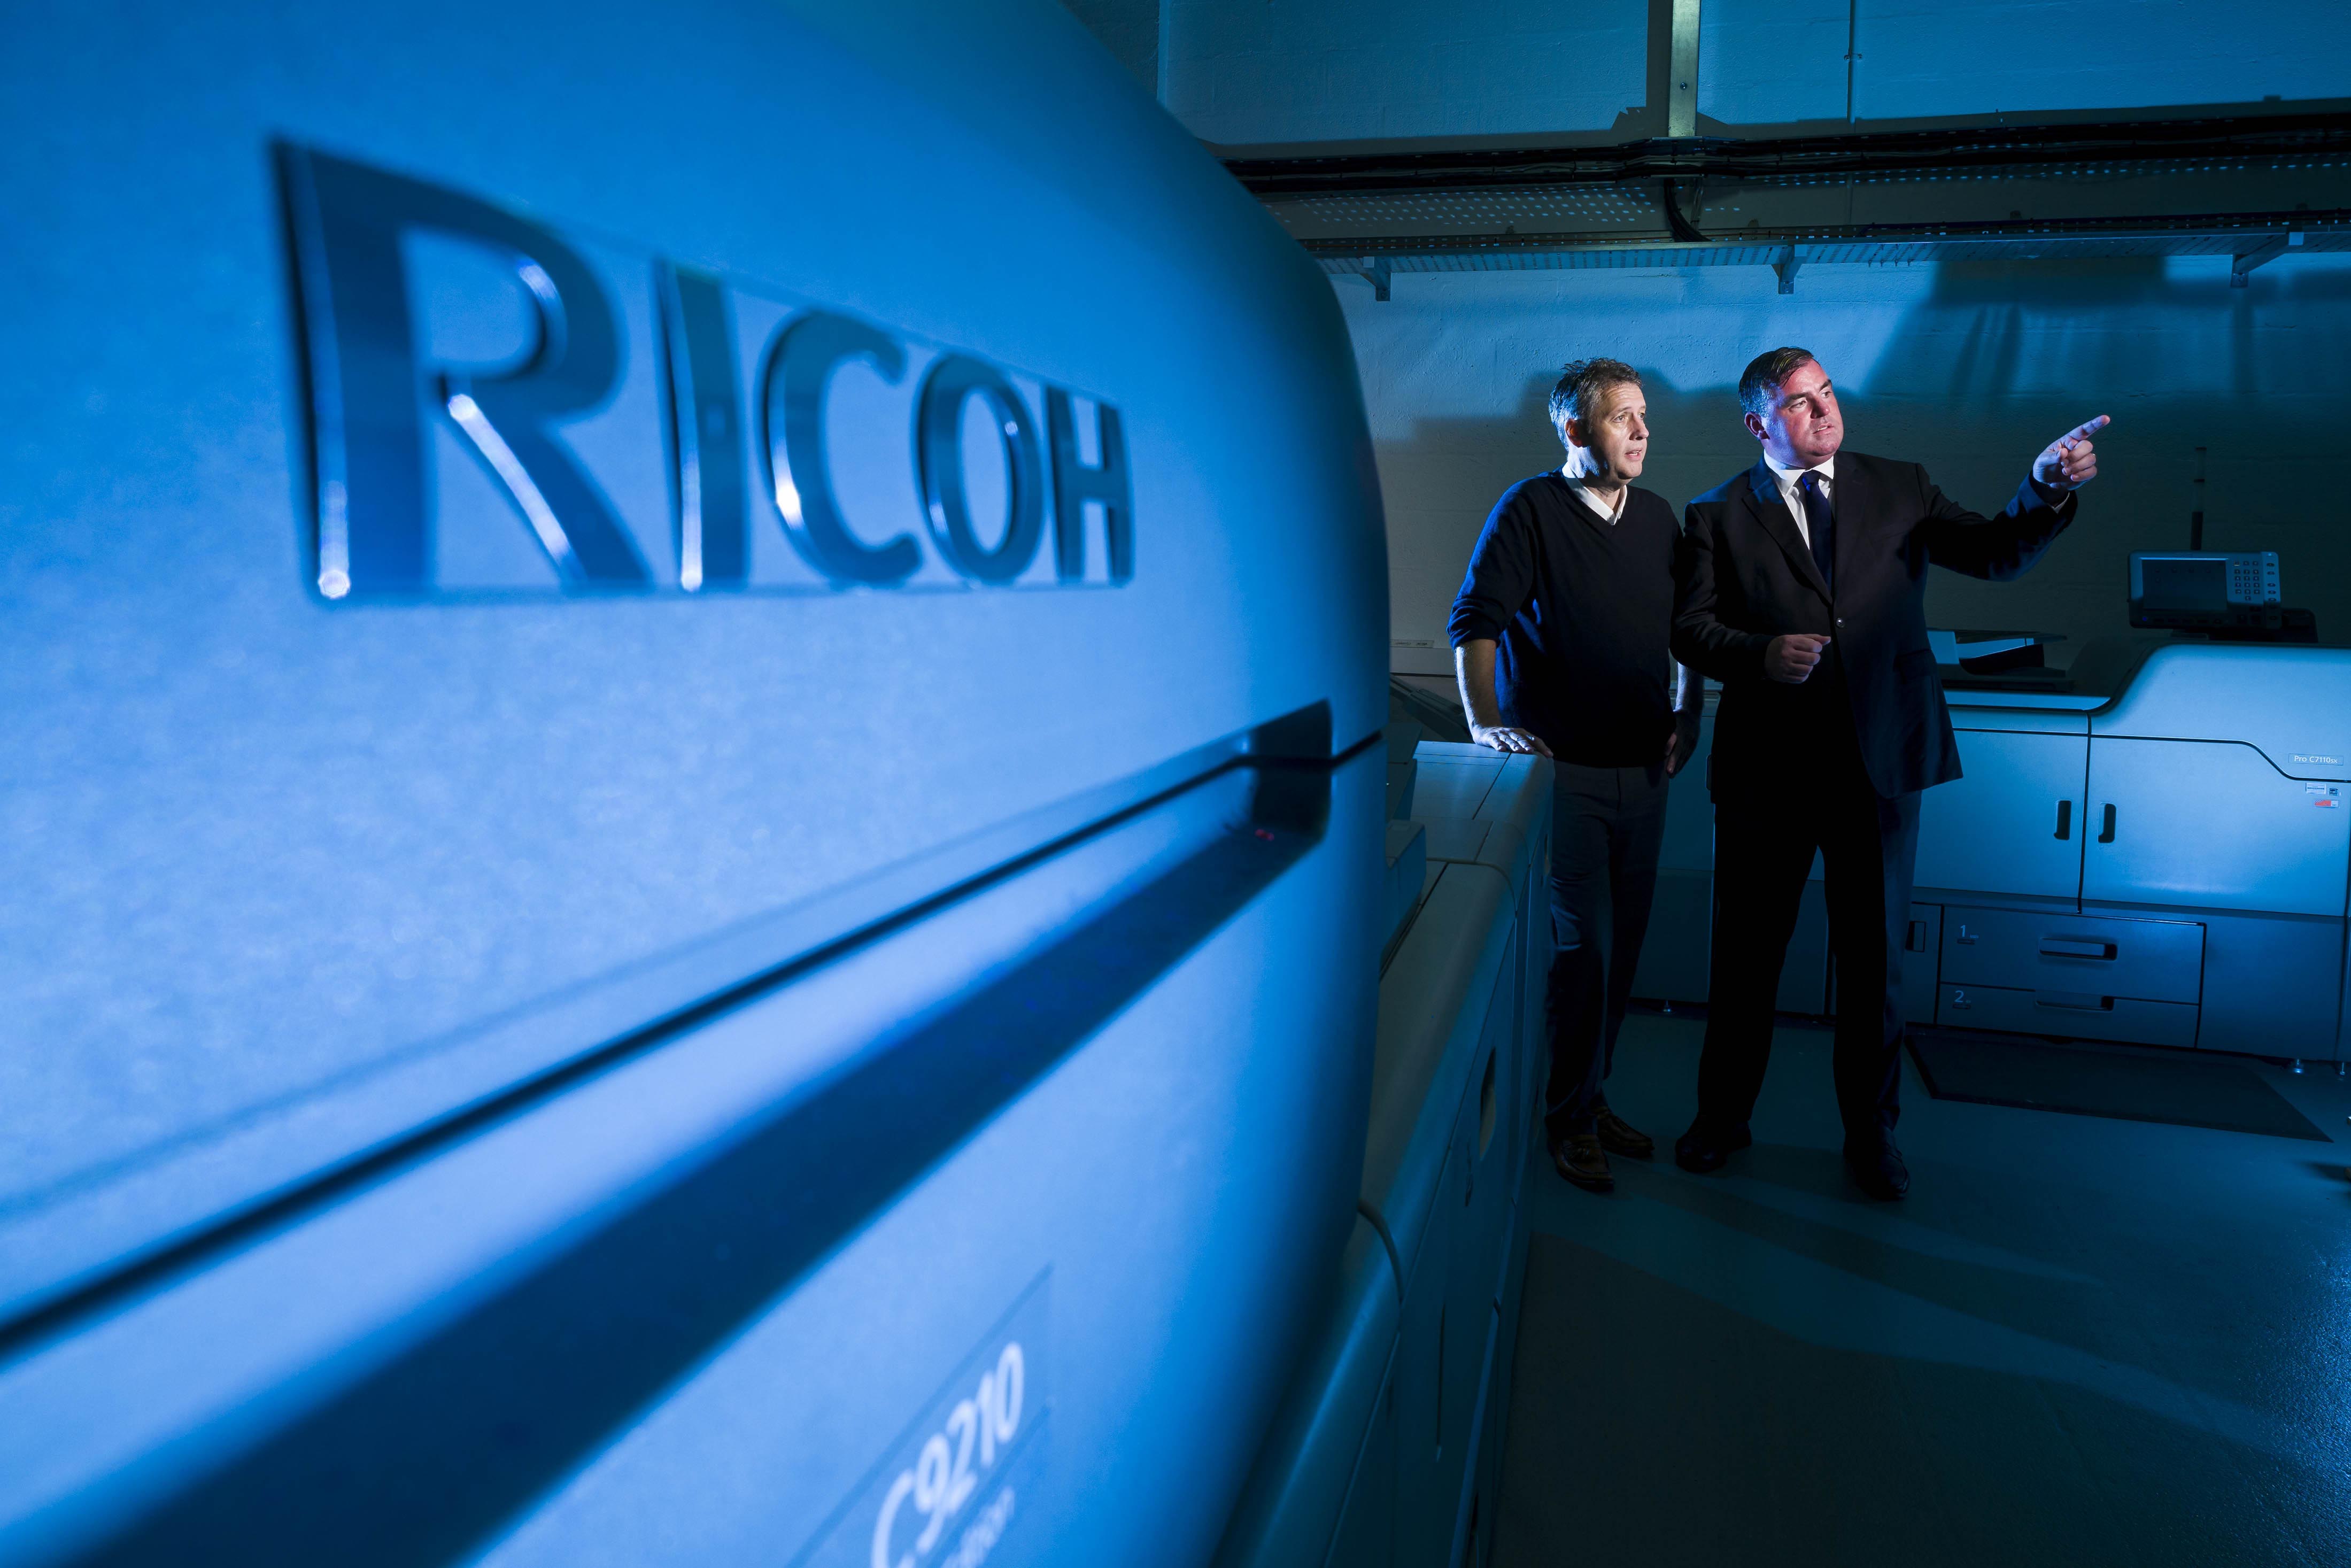 Ricoh Ireland boosts business growth for Definition Print in €500K partnership